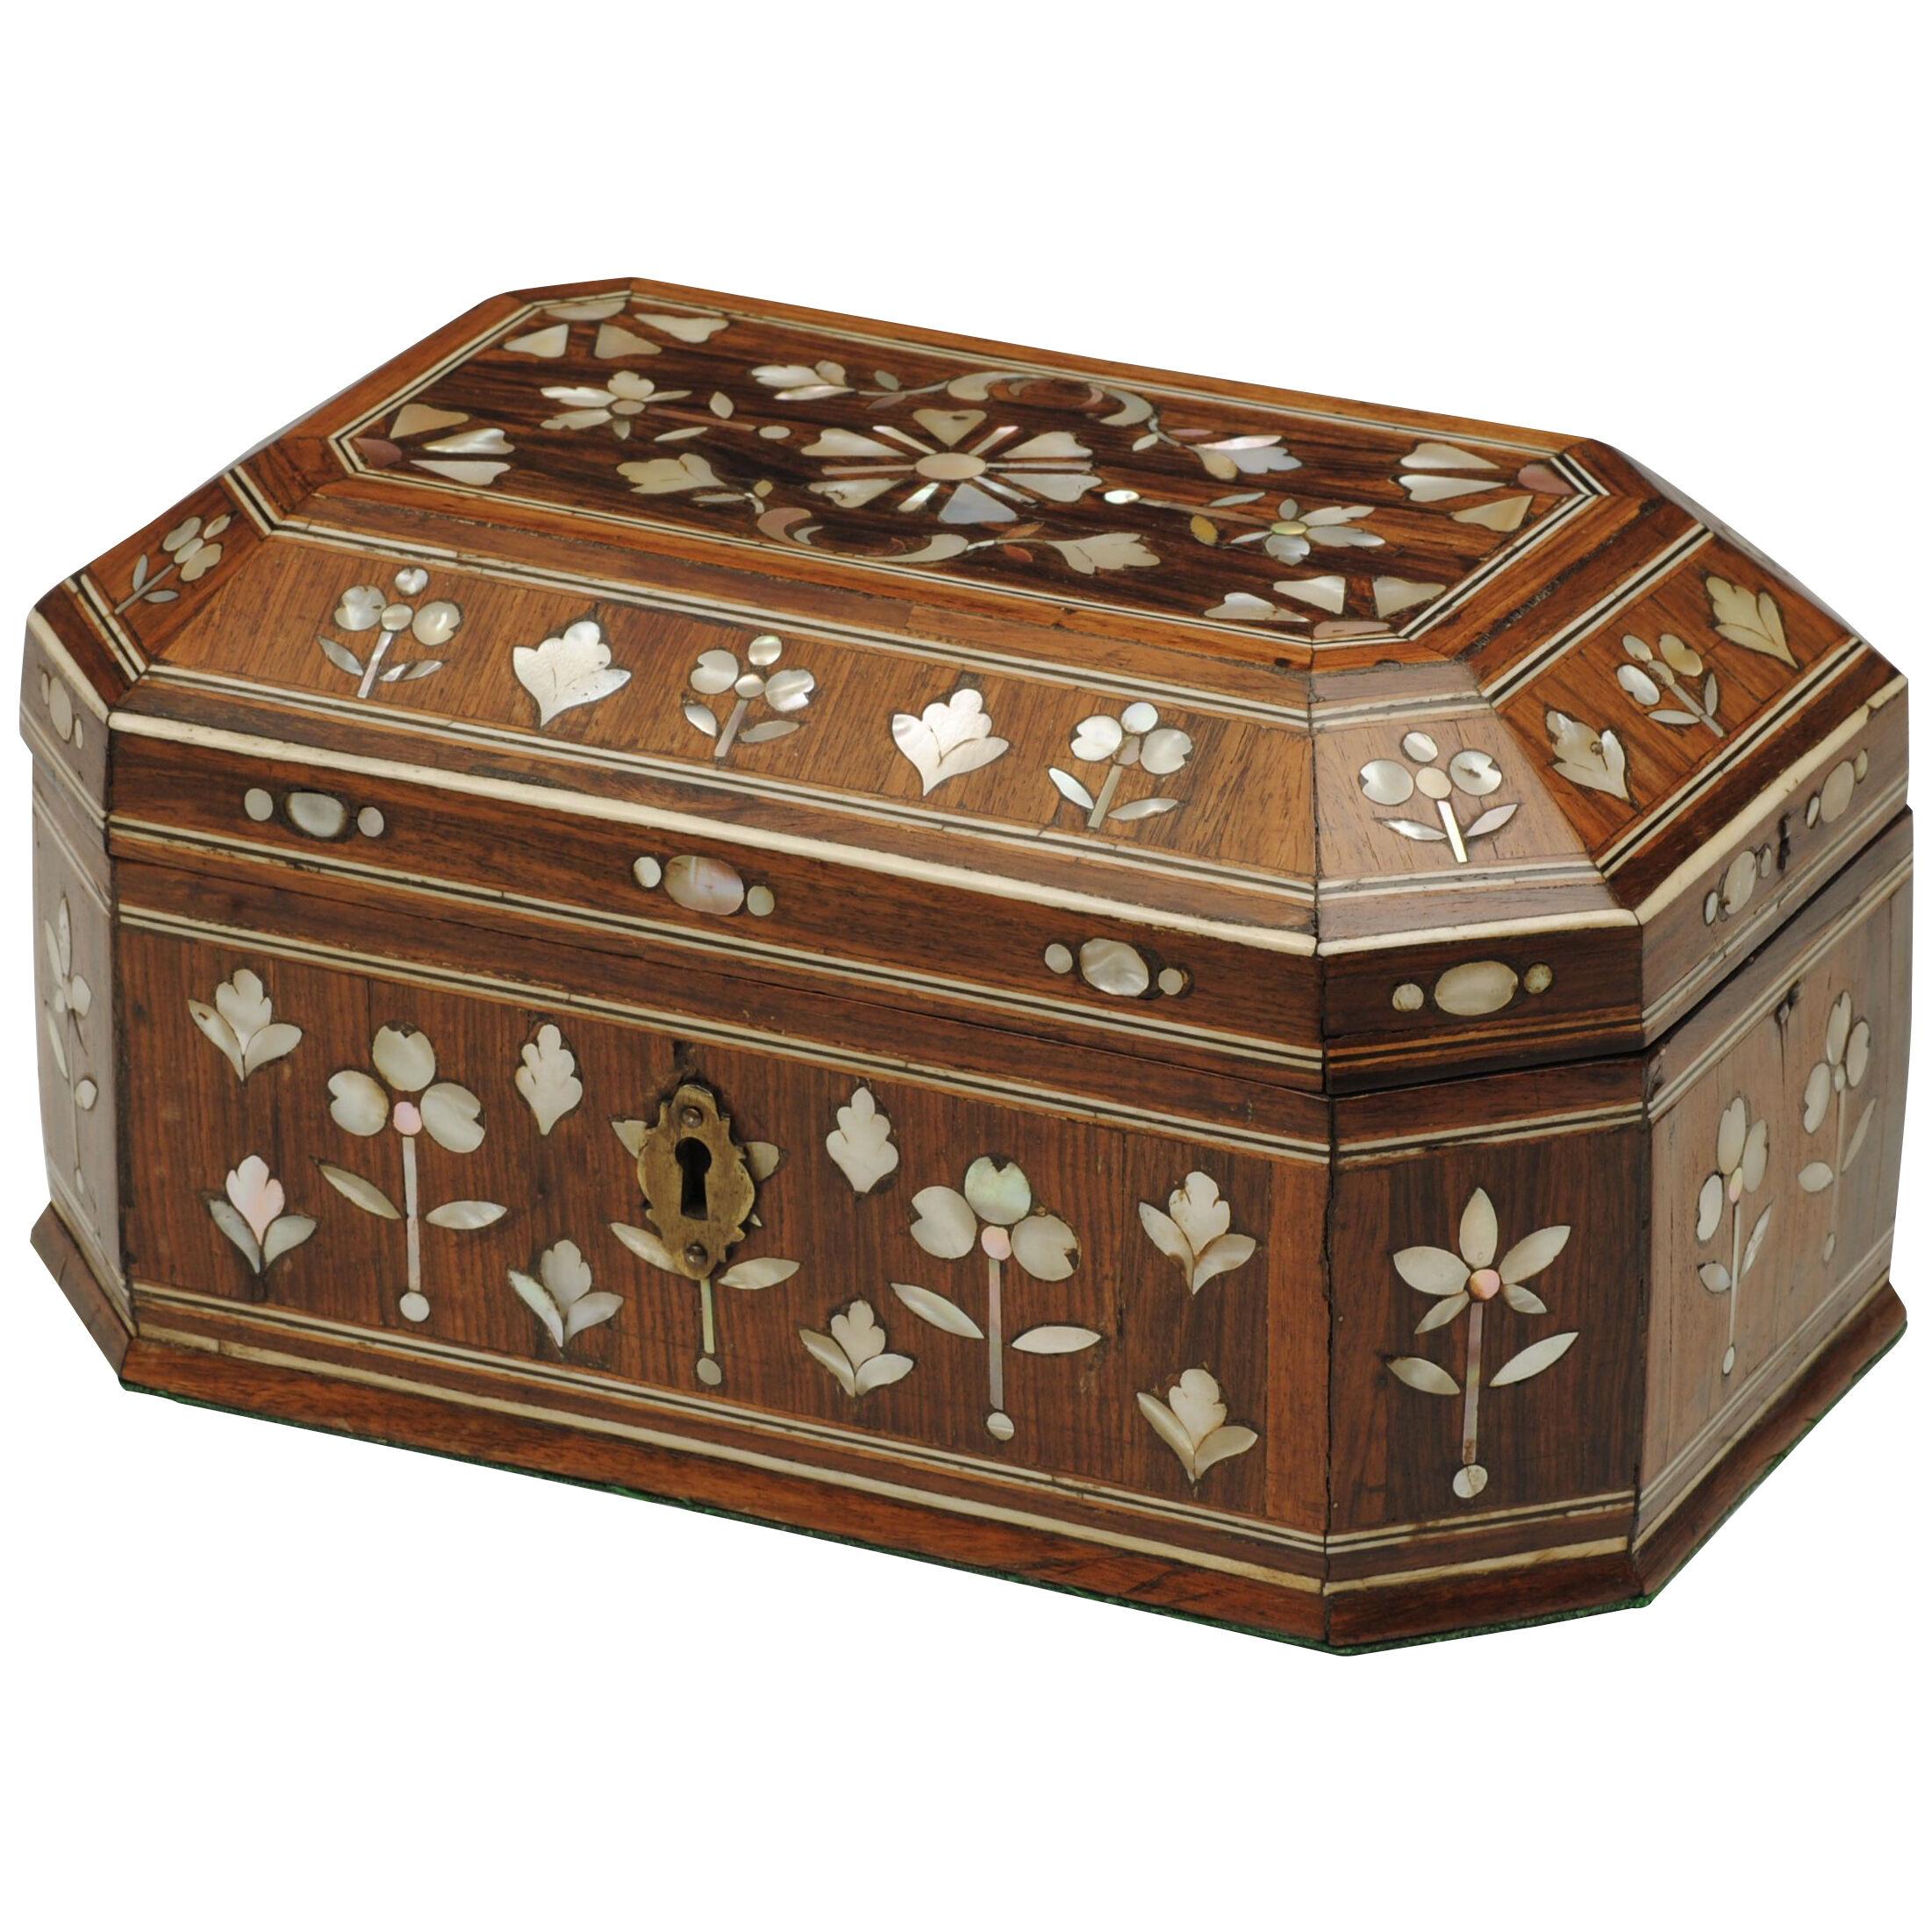 Early 18th Century South American Mother of Pearl Inlaid Box